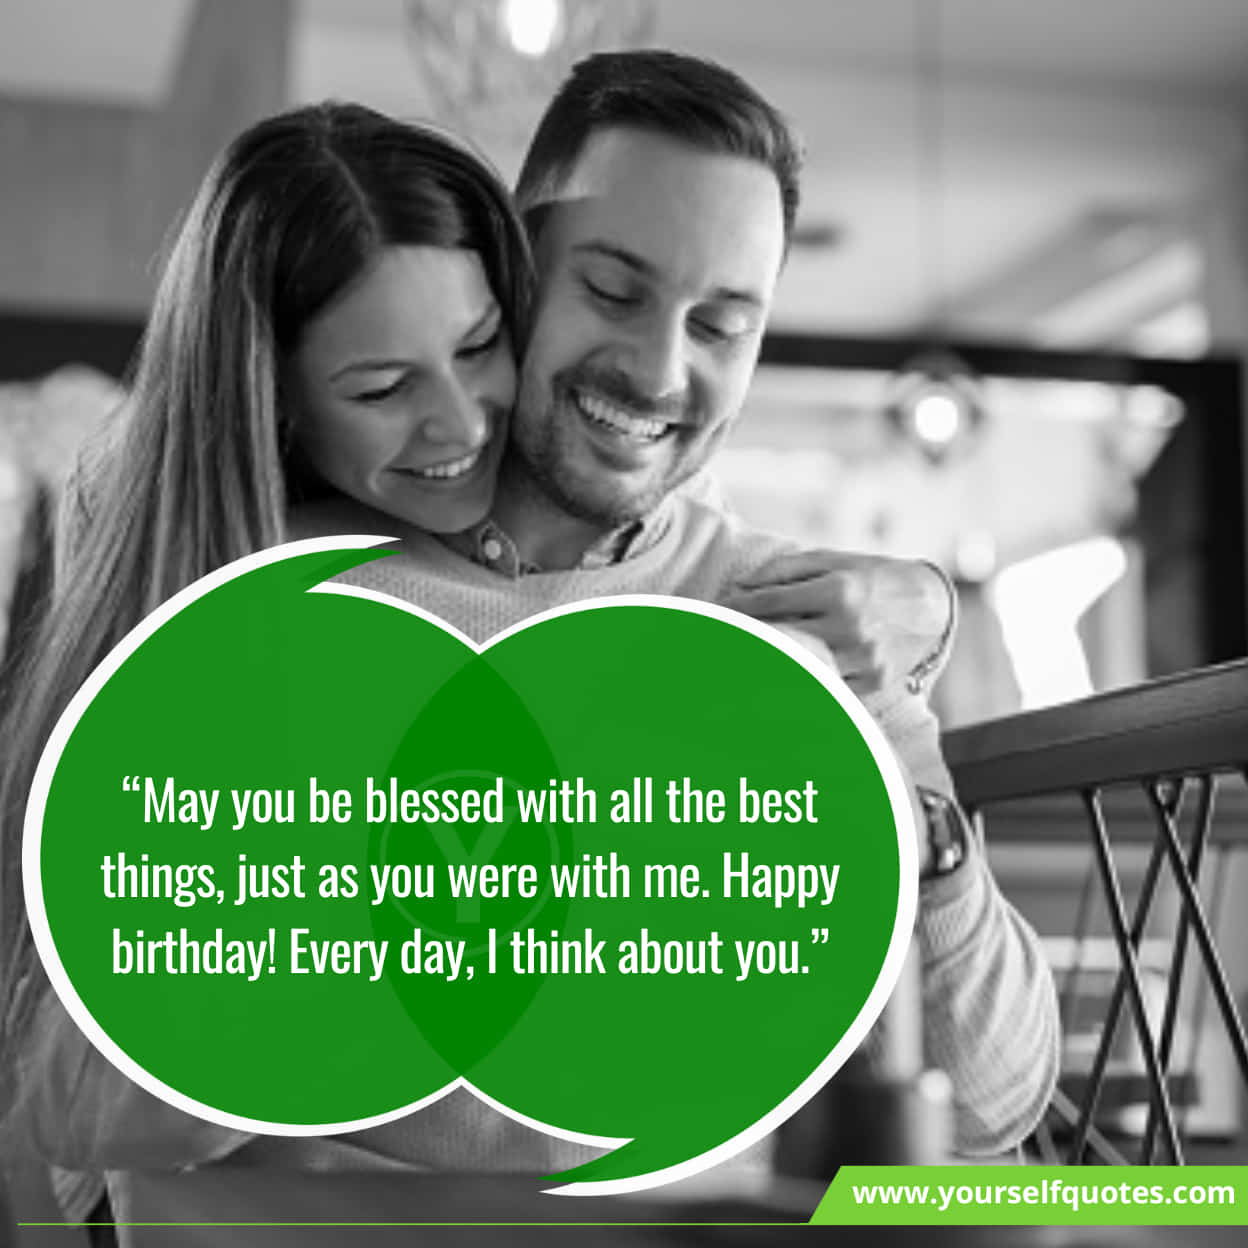 Alluring Wishes On Long Distance Girlfriend's Birthday